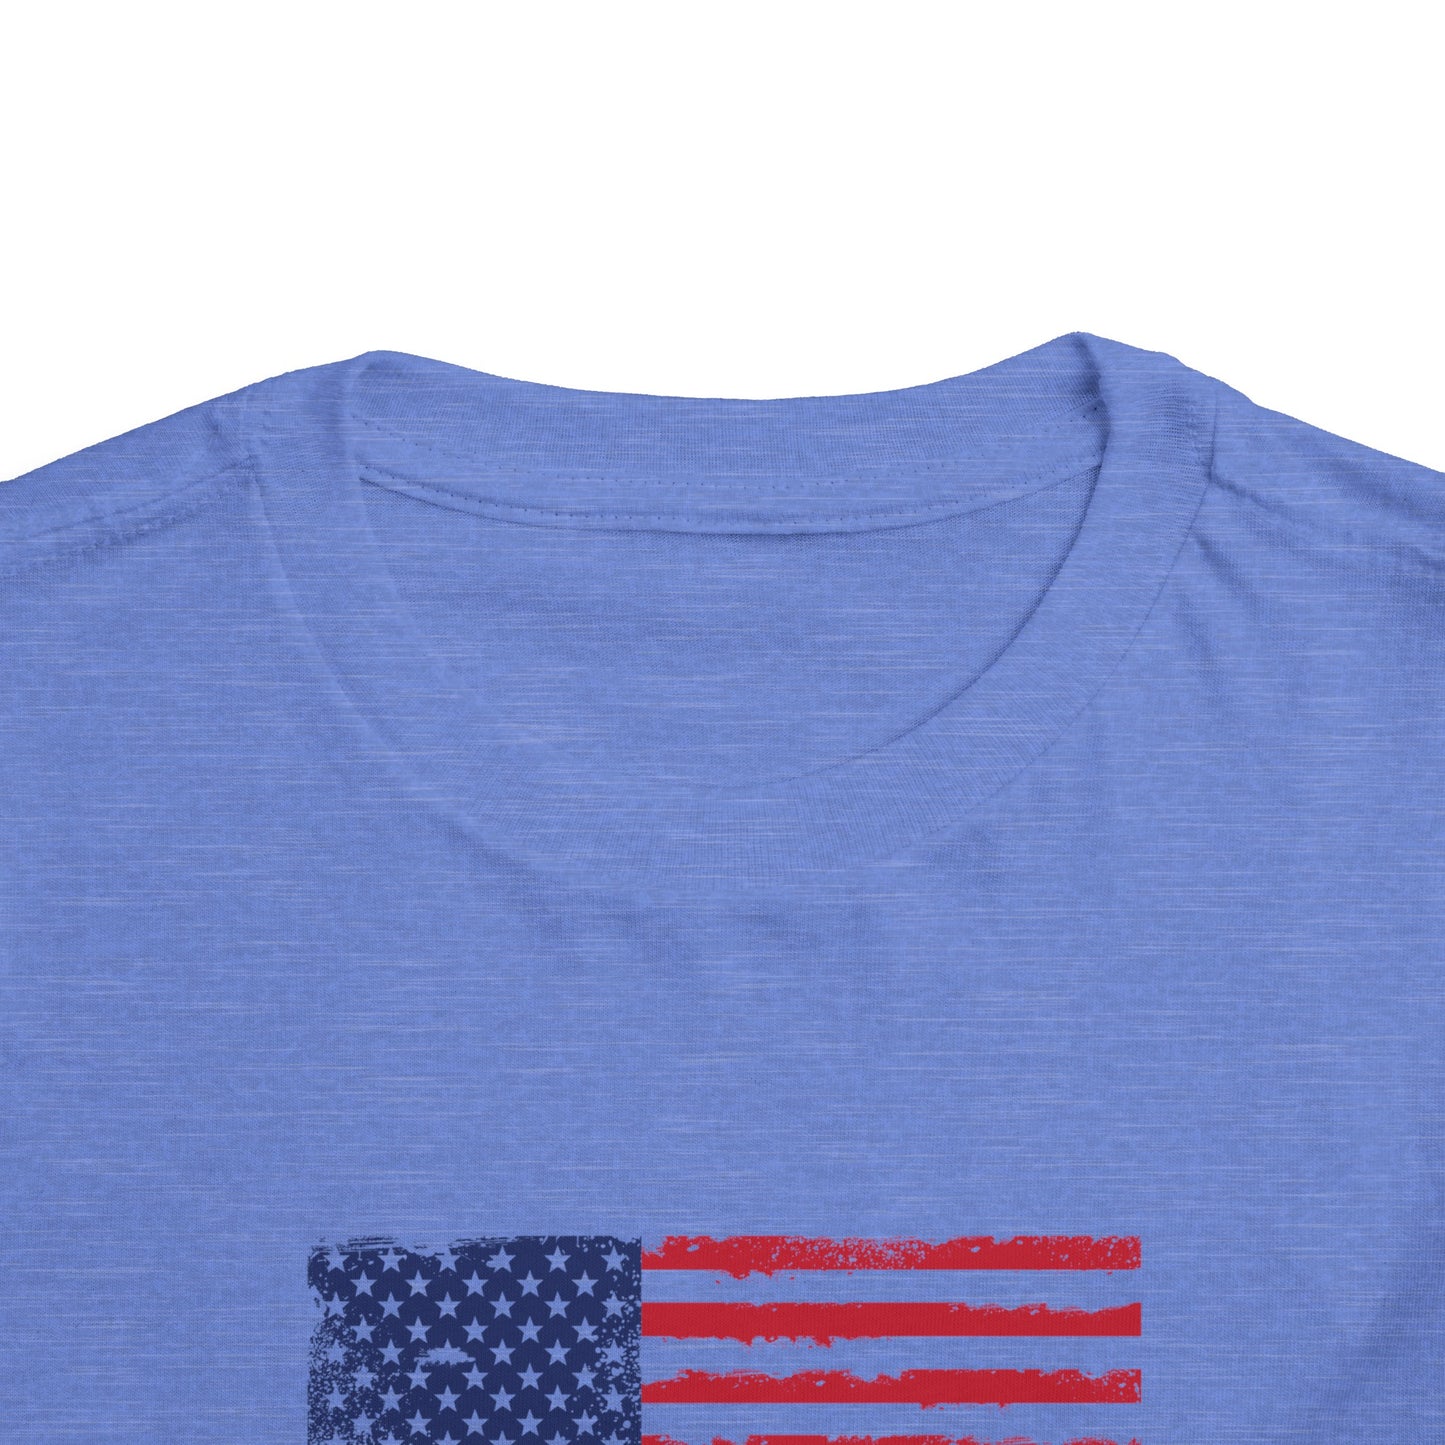 American Flag Toddler Heather Tee - Soft Airlume Cotton, Comfortable & Stylish